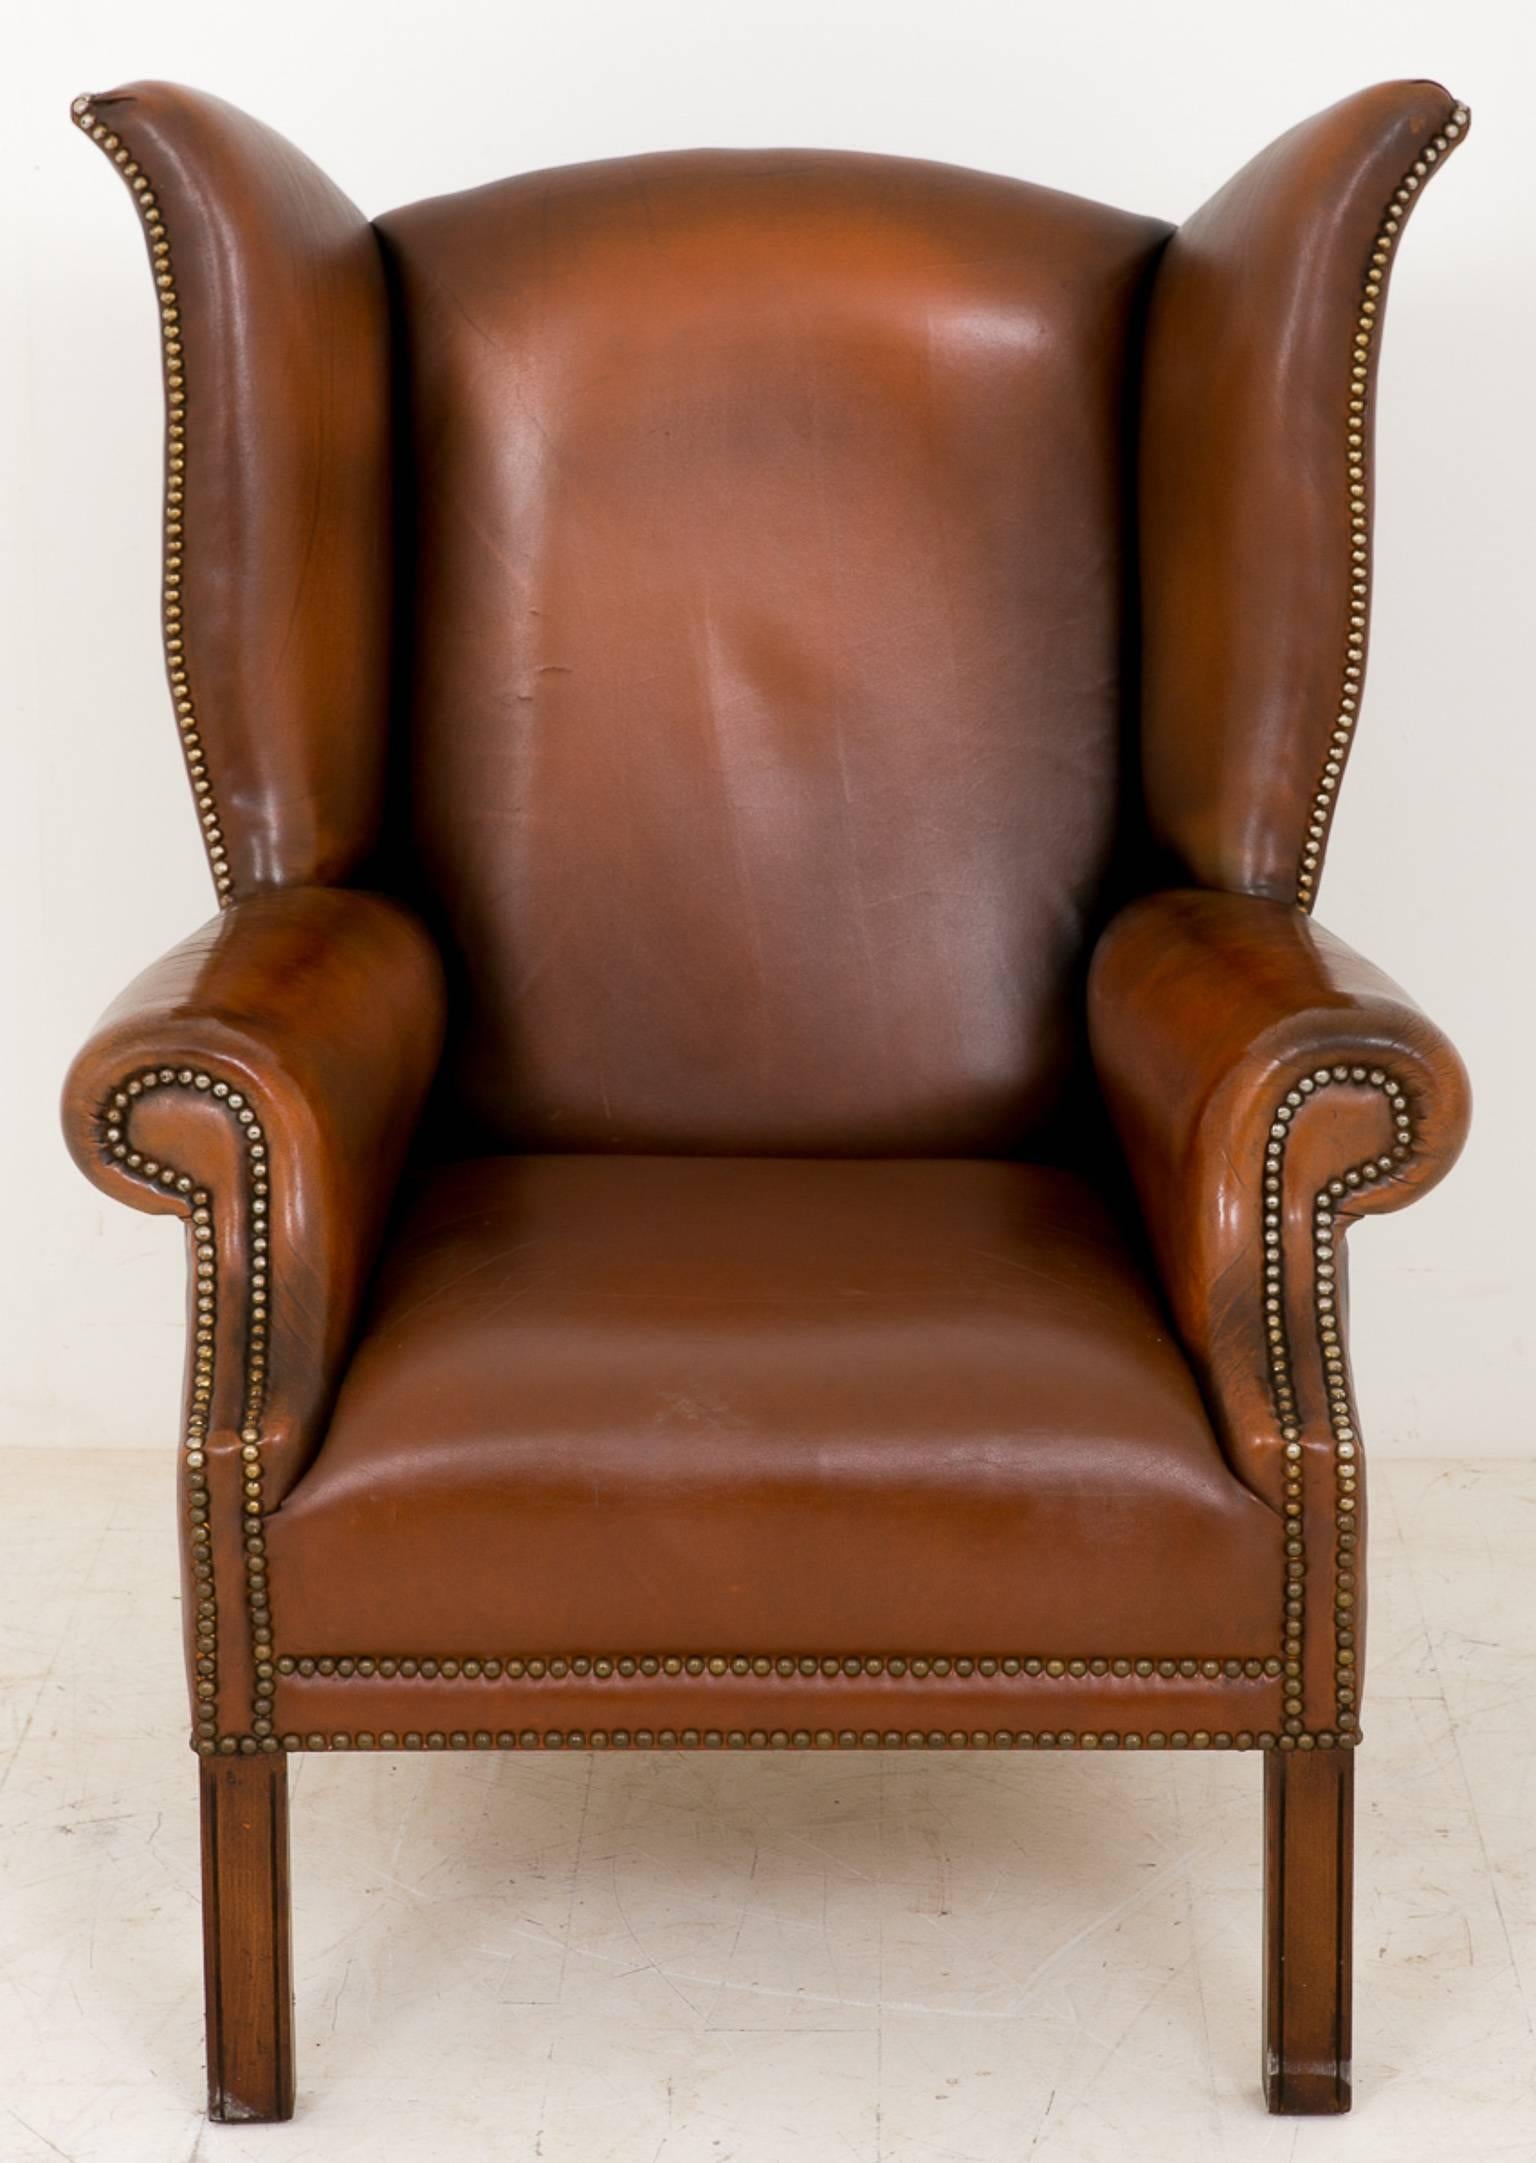 Pair of Leather Wing Chairs In Good Condition For Sale In Norwich, Norfolk